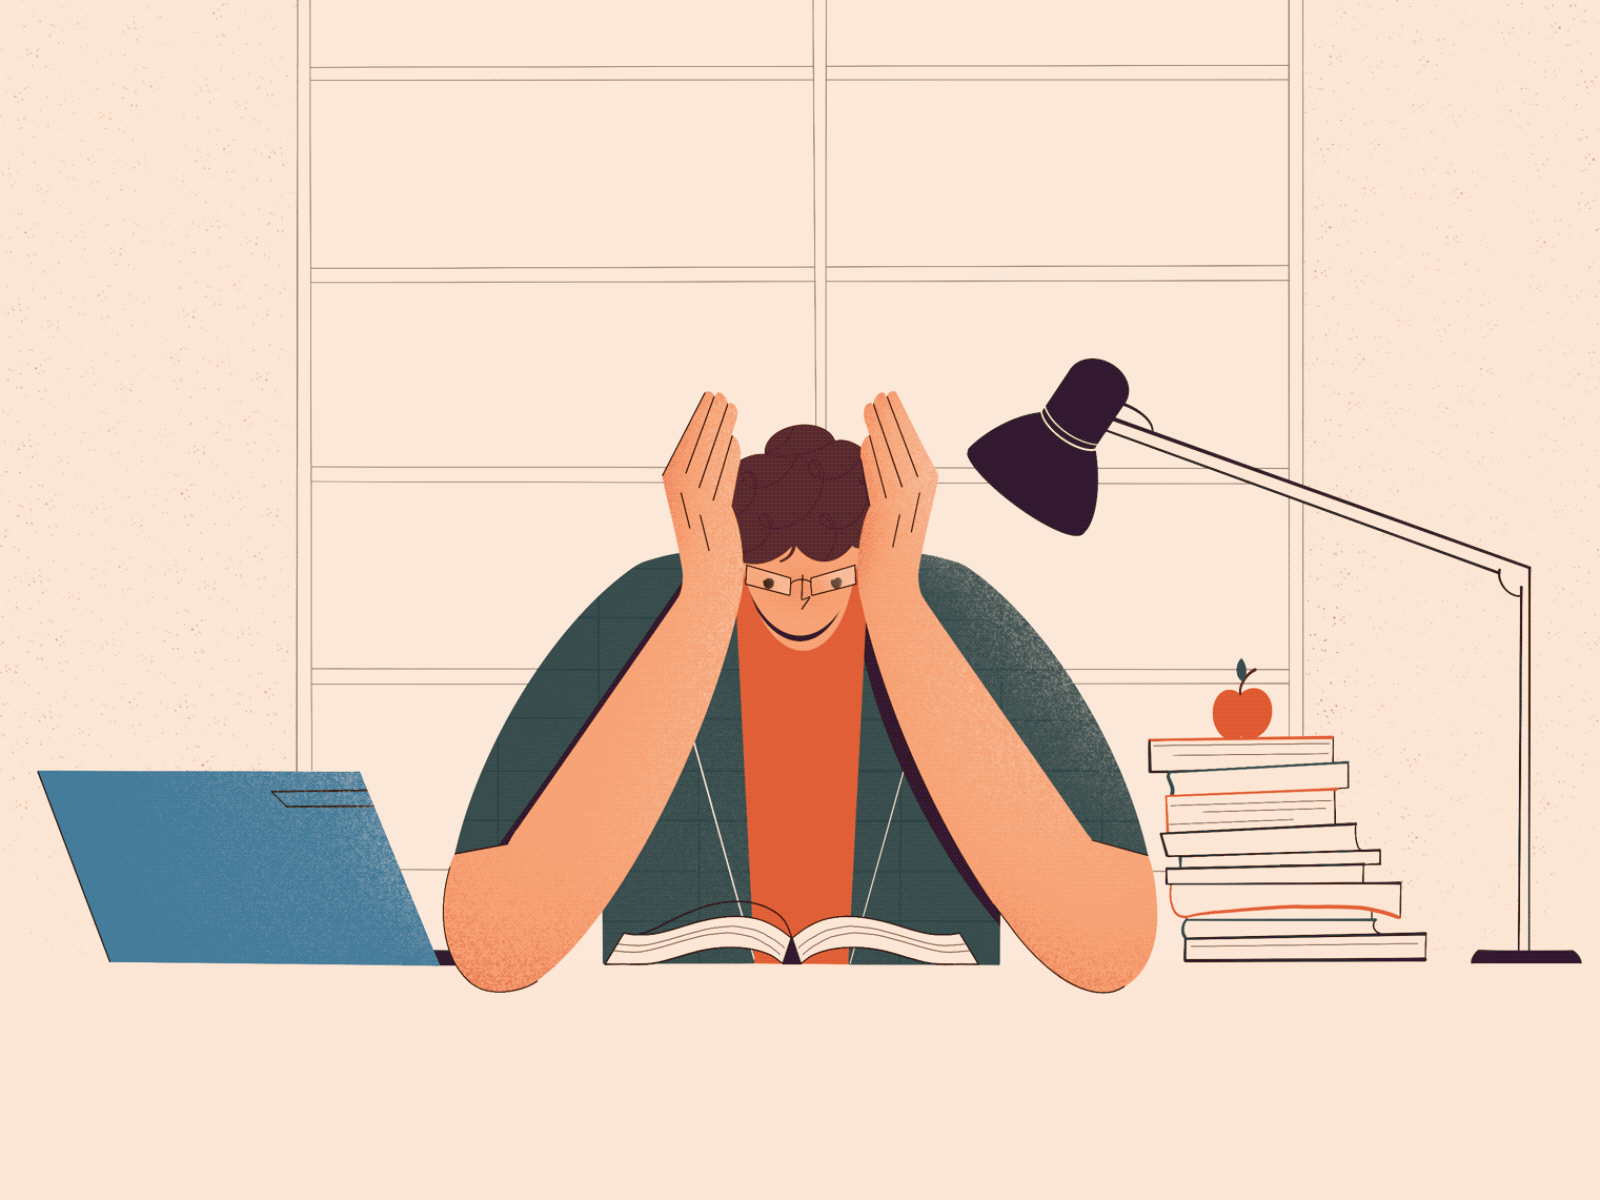 tired of exams by Tina Migel on Dribbble